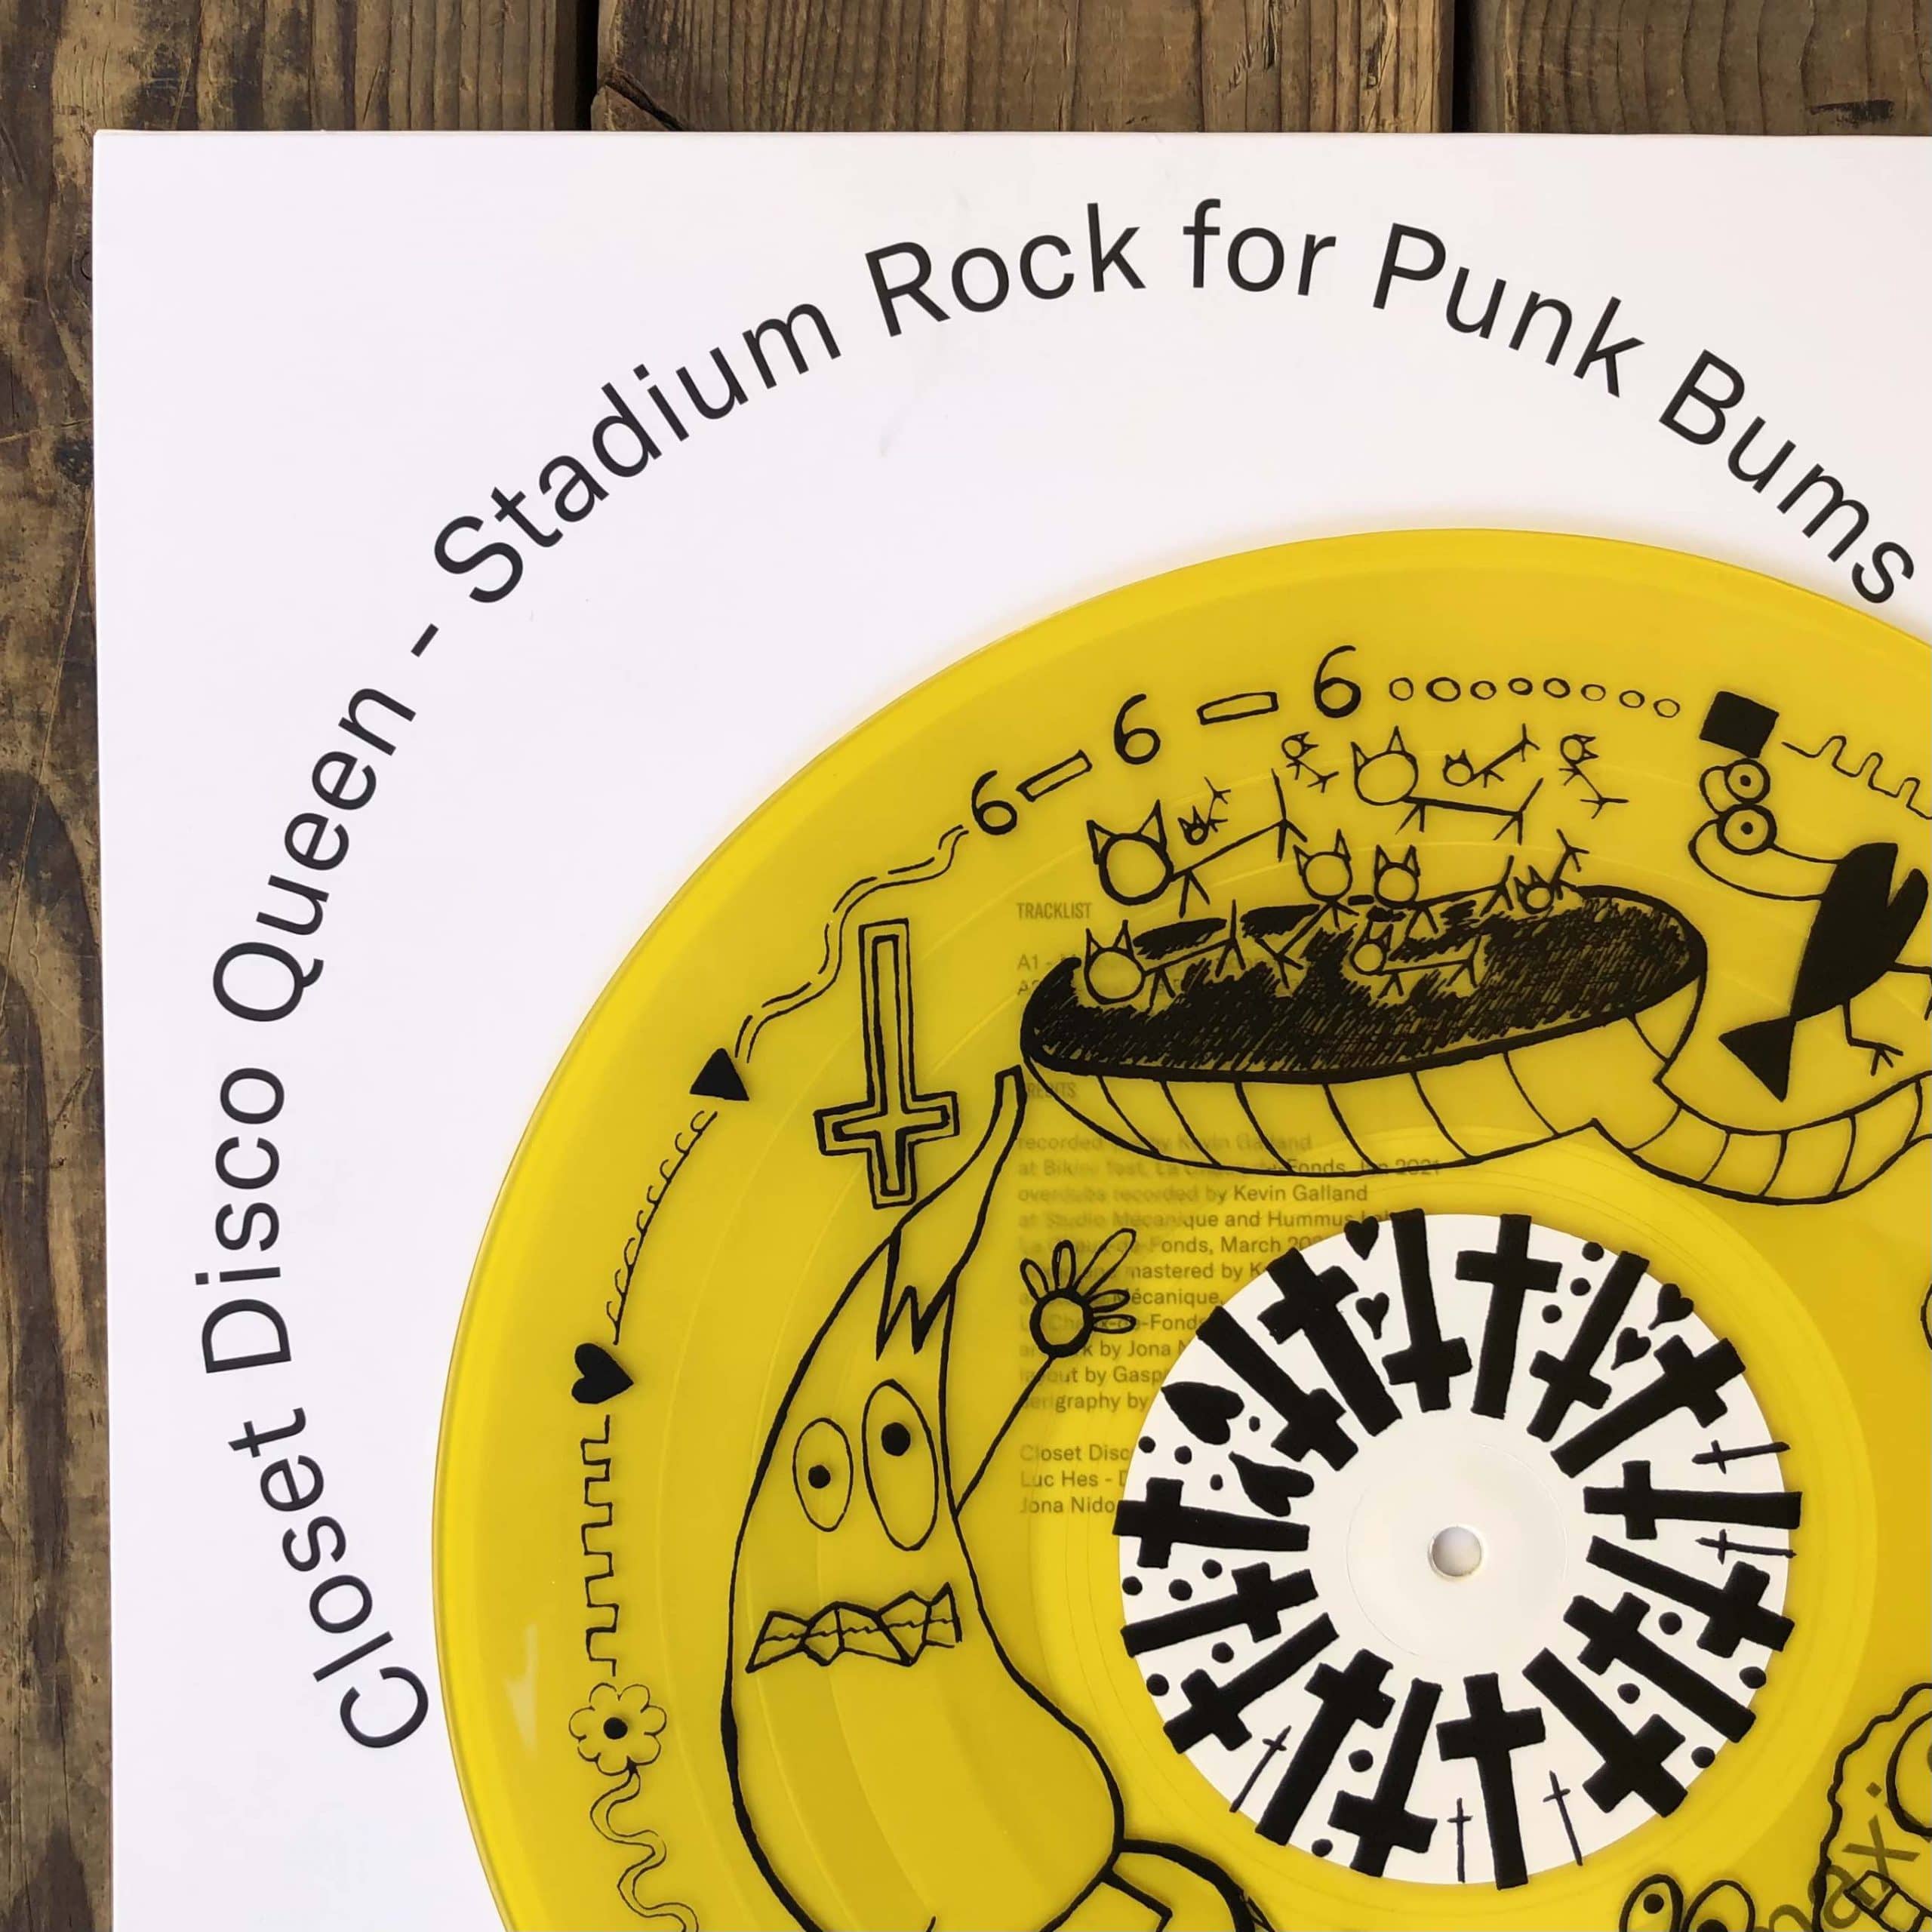 Closet Disco Queen - Stadium Rock for Punk Bums col. 12" (Hummus) Perseverance: persistence in doing something despite difficulty and delay in achieving success. Our secret weapon since 2005.